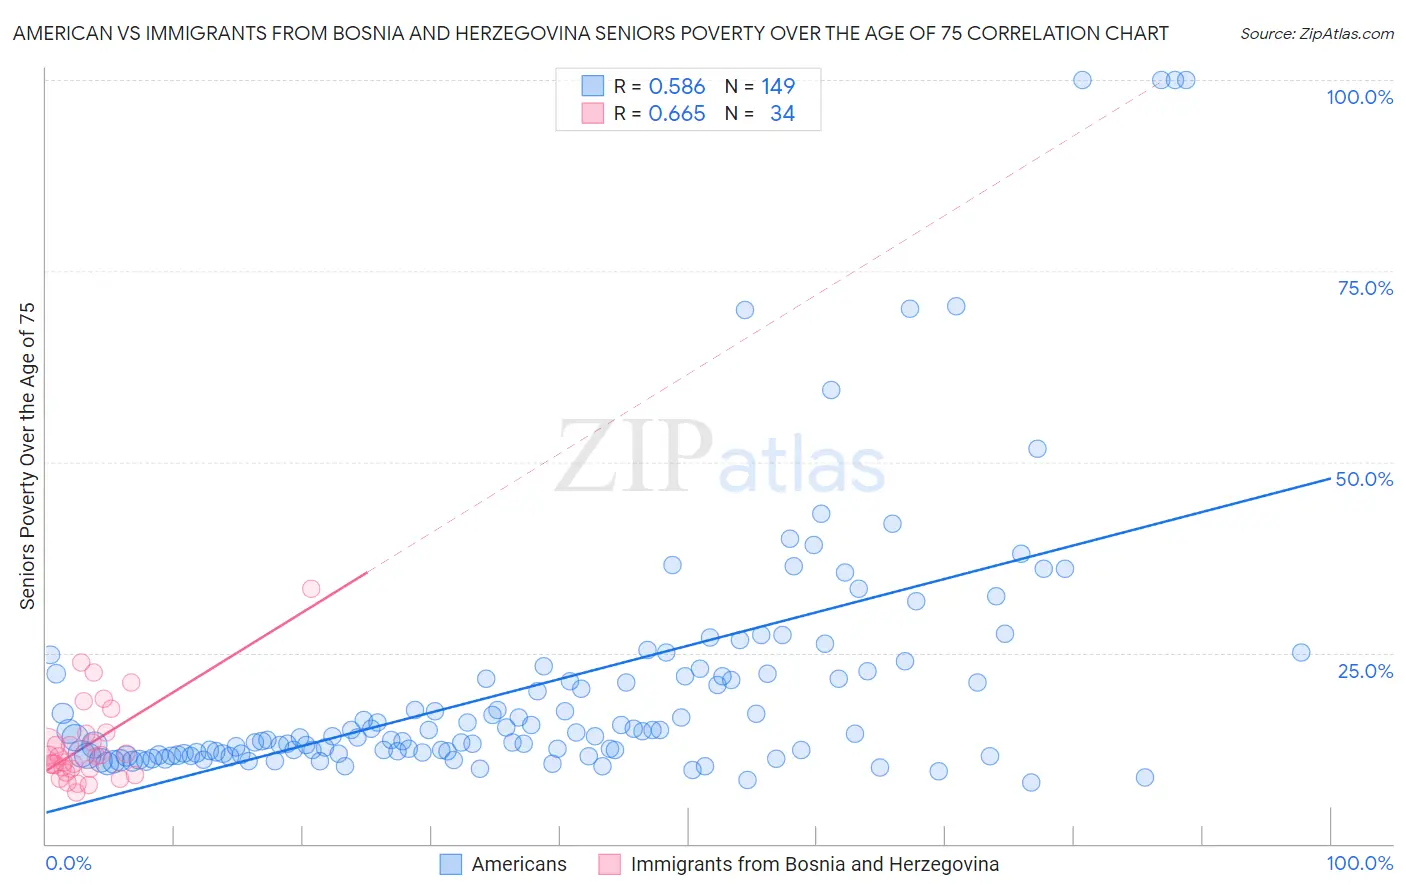 American vs Immigrants from Bosnia and Herzegovina Seniors Poverty Over the Age of 75